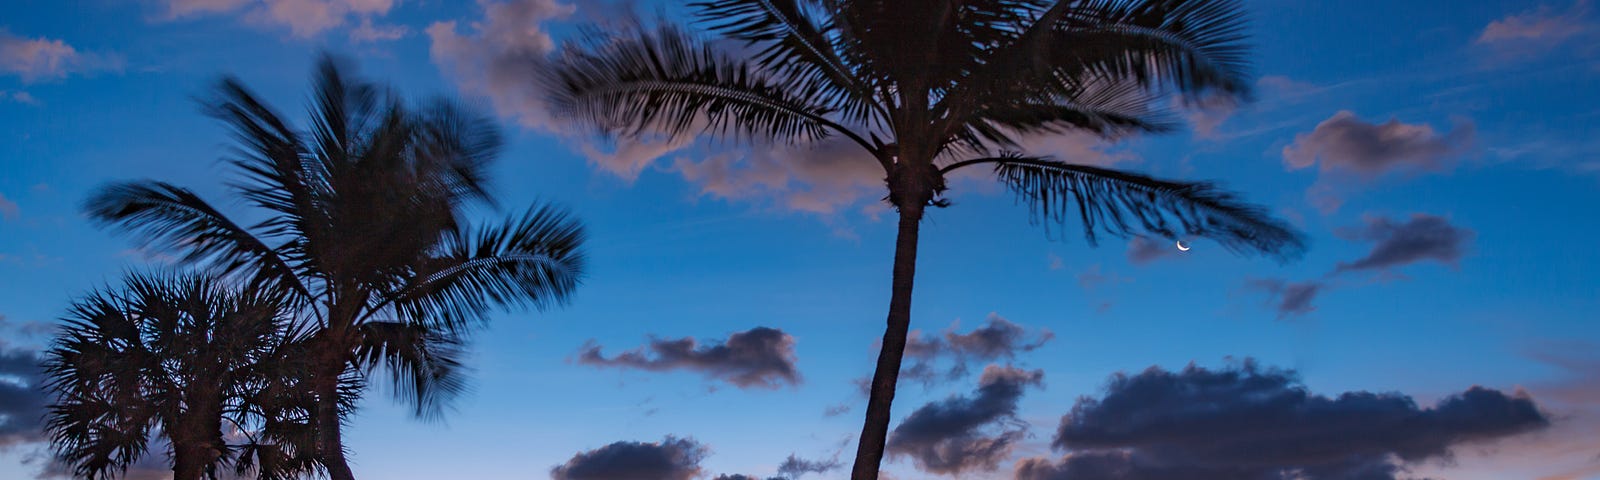 Just before the sun rises, vibrant colors fill the sky over the ocean behind swaying palm trees.